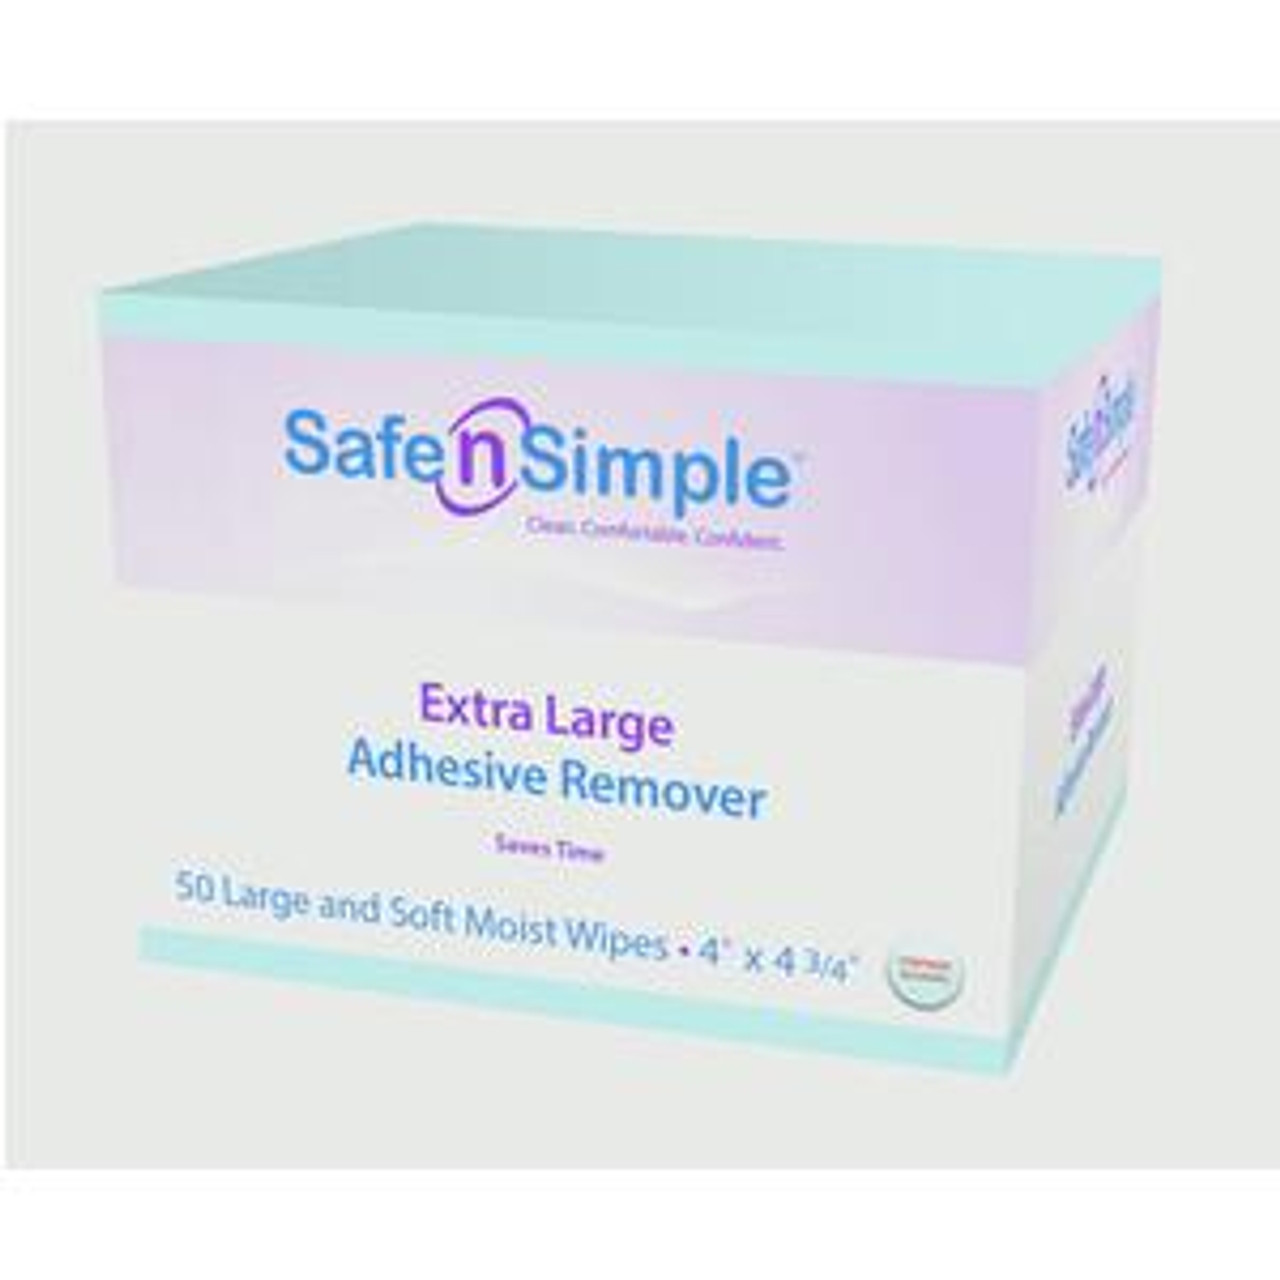 Extra Large Adhesive Remover Wipes 4.75 x 4 (50 count)